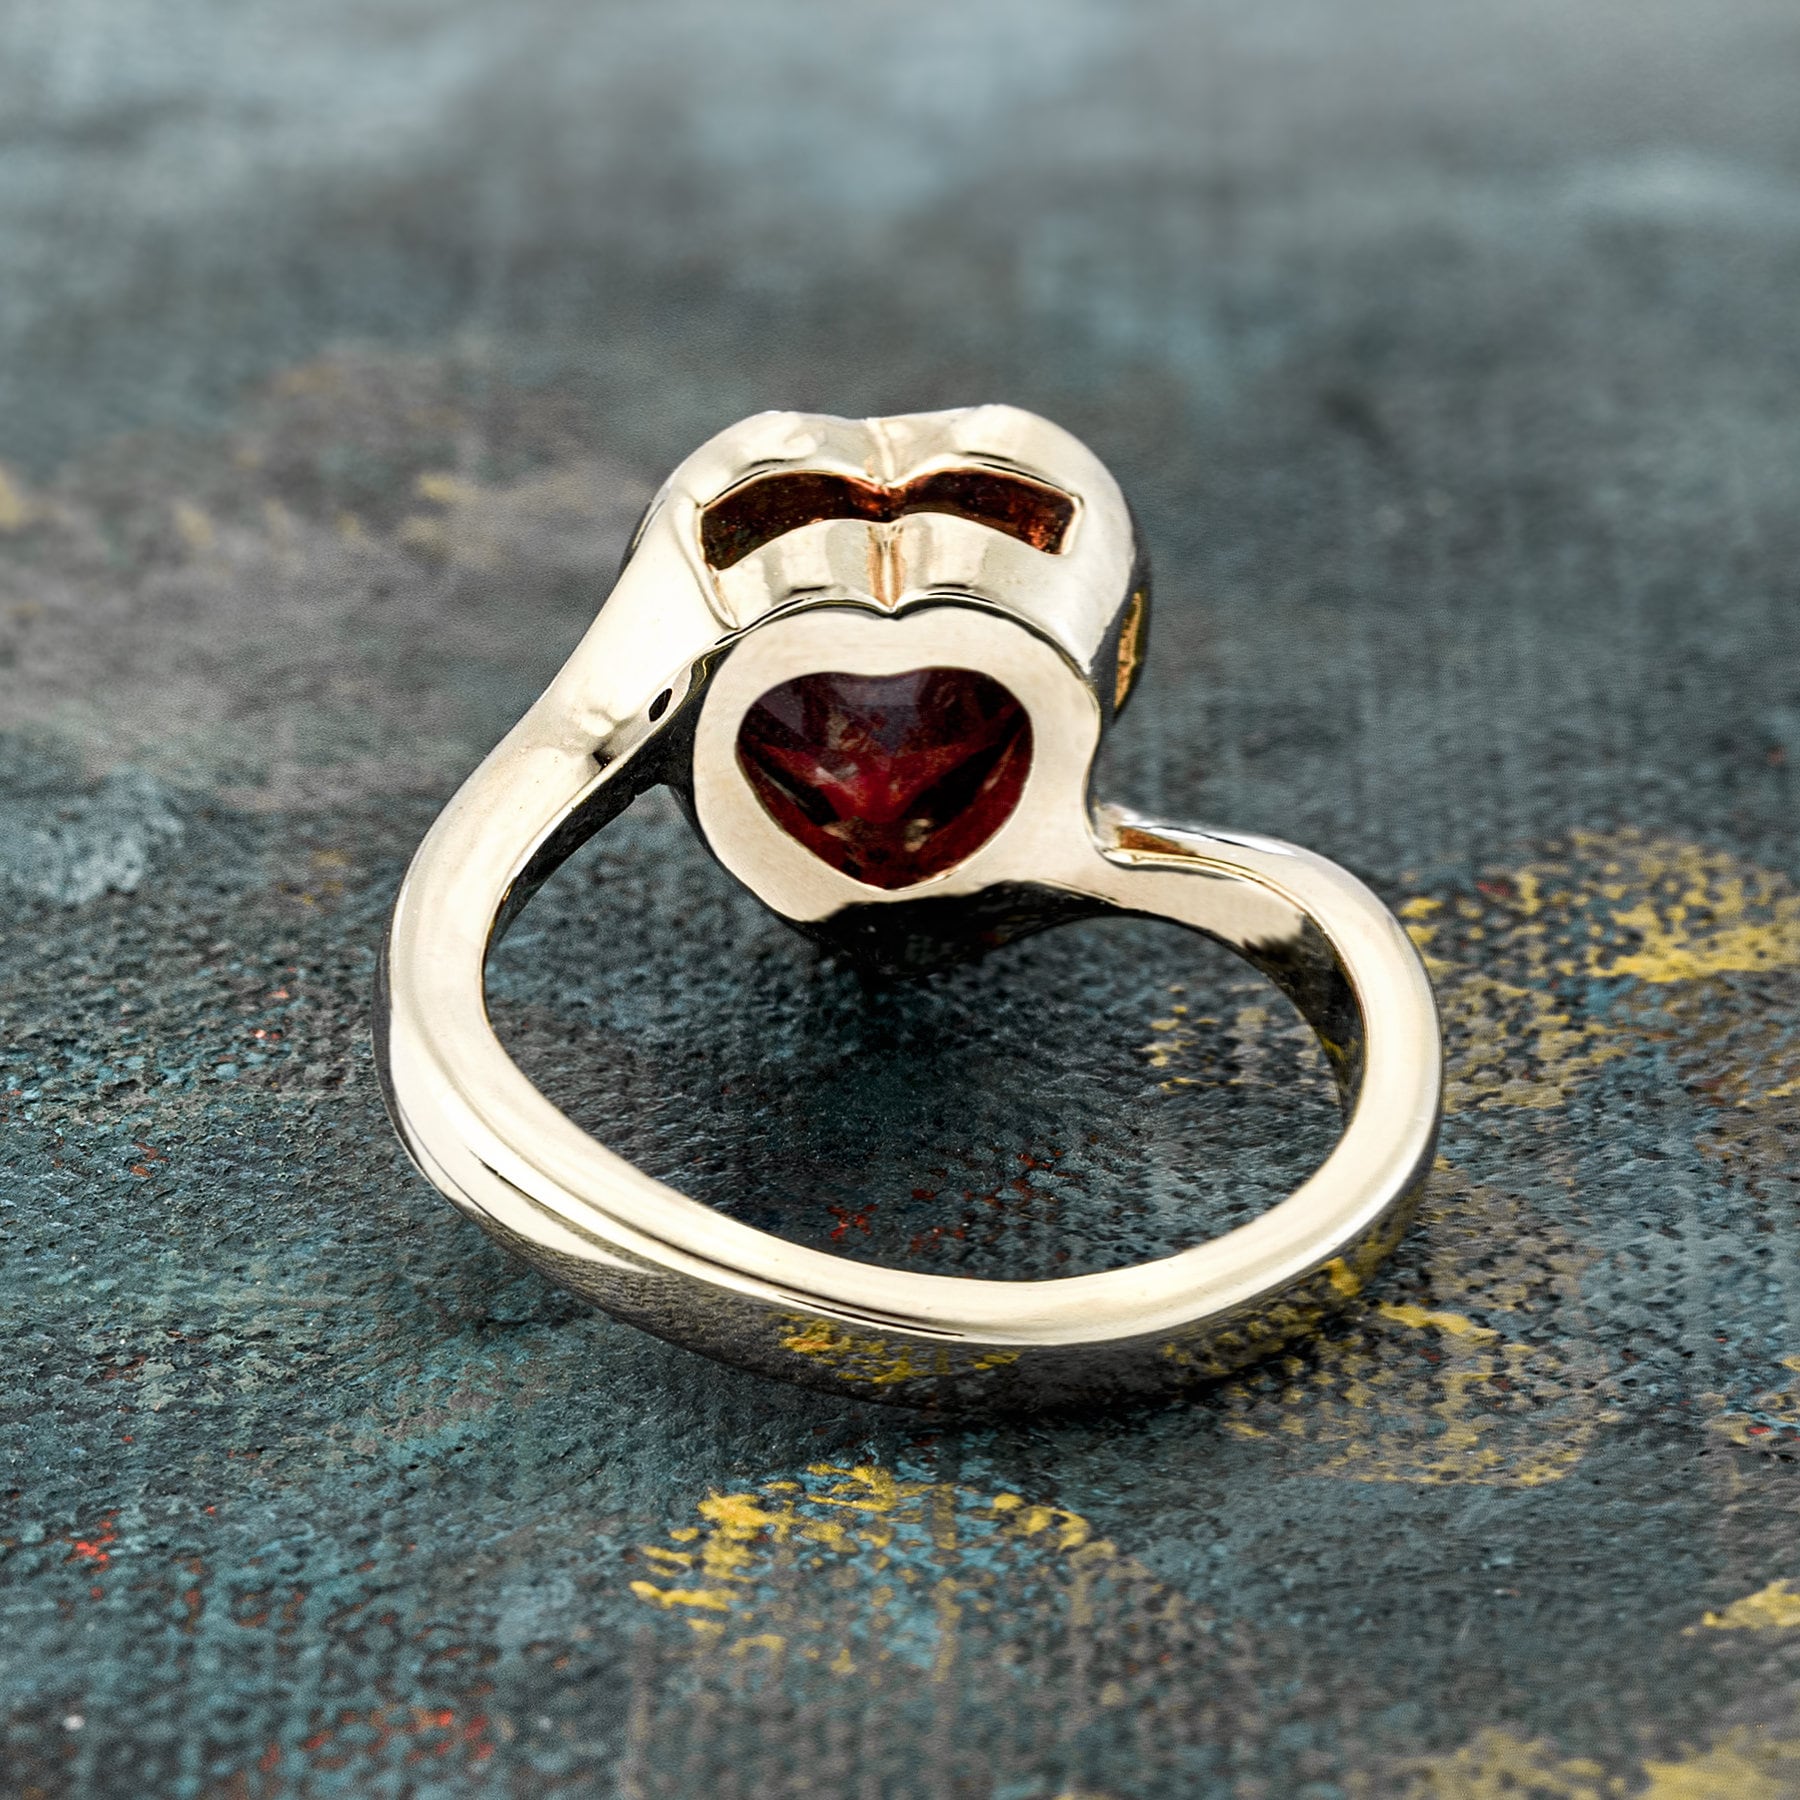 Vintage Ring 1970s Heart Shape Ring with Ruby Swarovski Crystal 18k Gold Antique Womans Jewelry #R1400 - Limited Stock - Never Worn